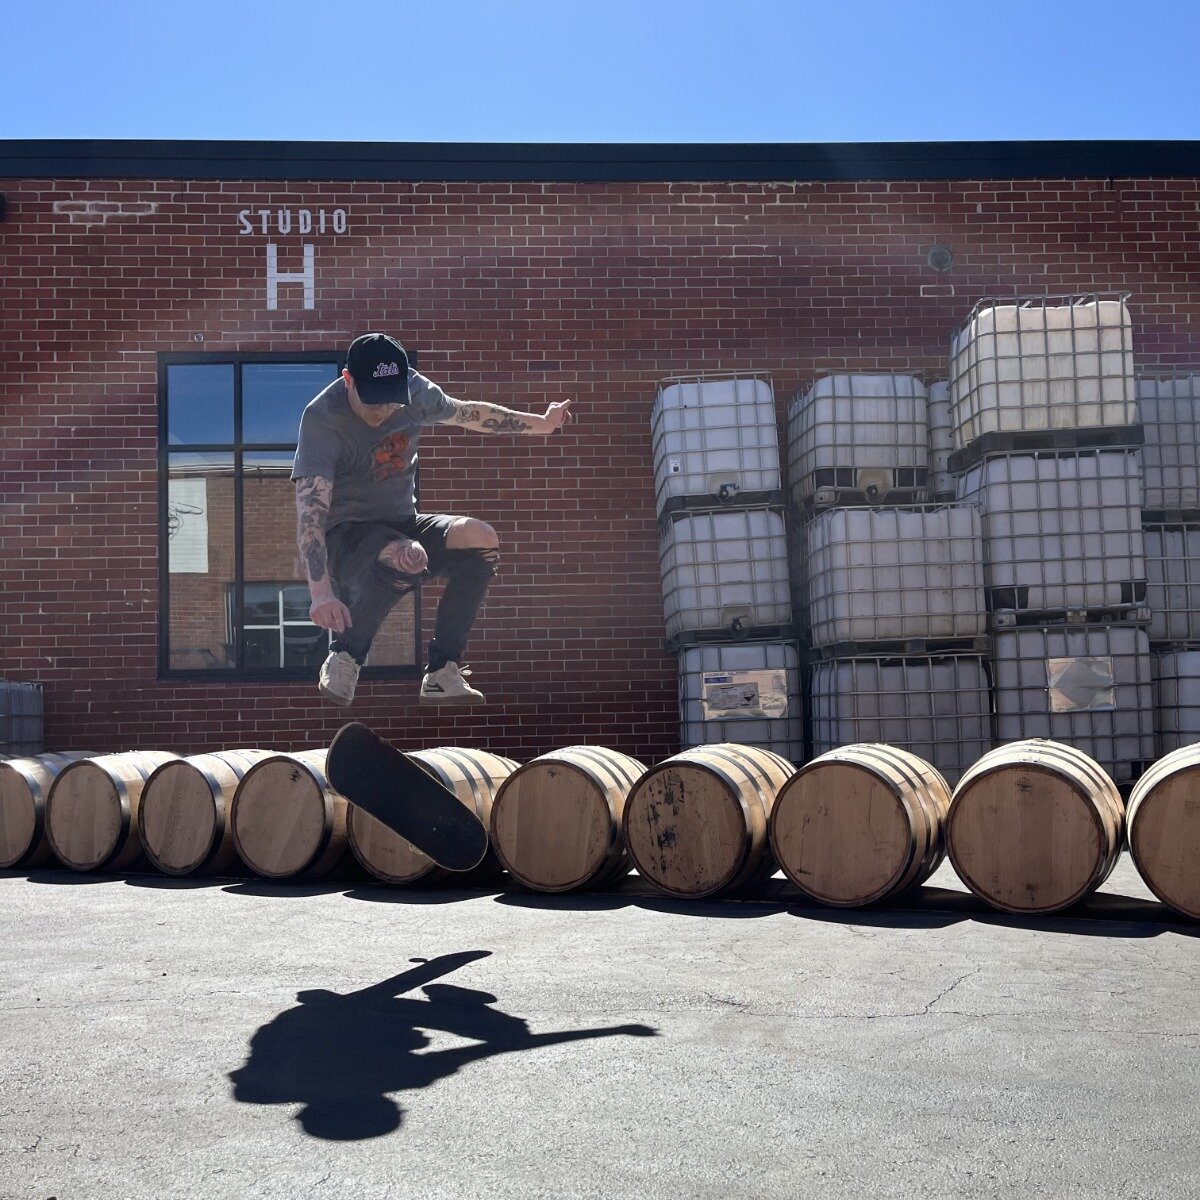 Scenes from the distillery with Distiller @_whitskey_

As one does when swelling barrels.

#bourbon #craftdistillery